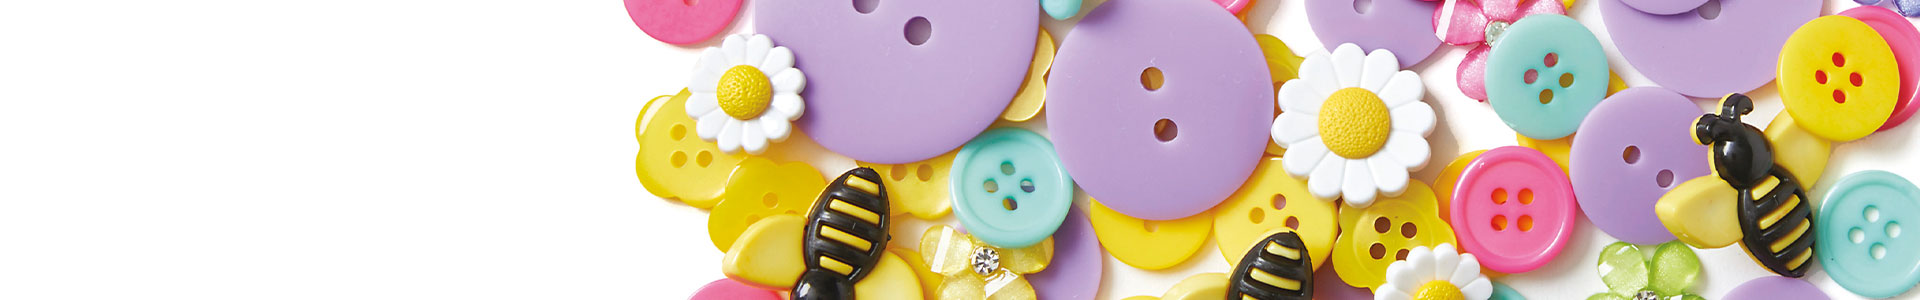 Our novelty buttons are perfect for adding shape, color & whimsy to your sewing & crafting.